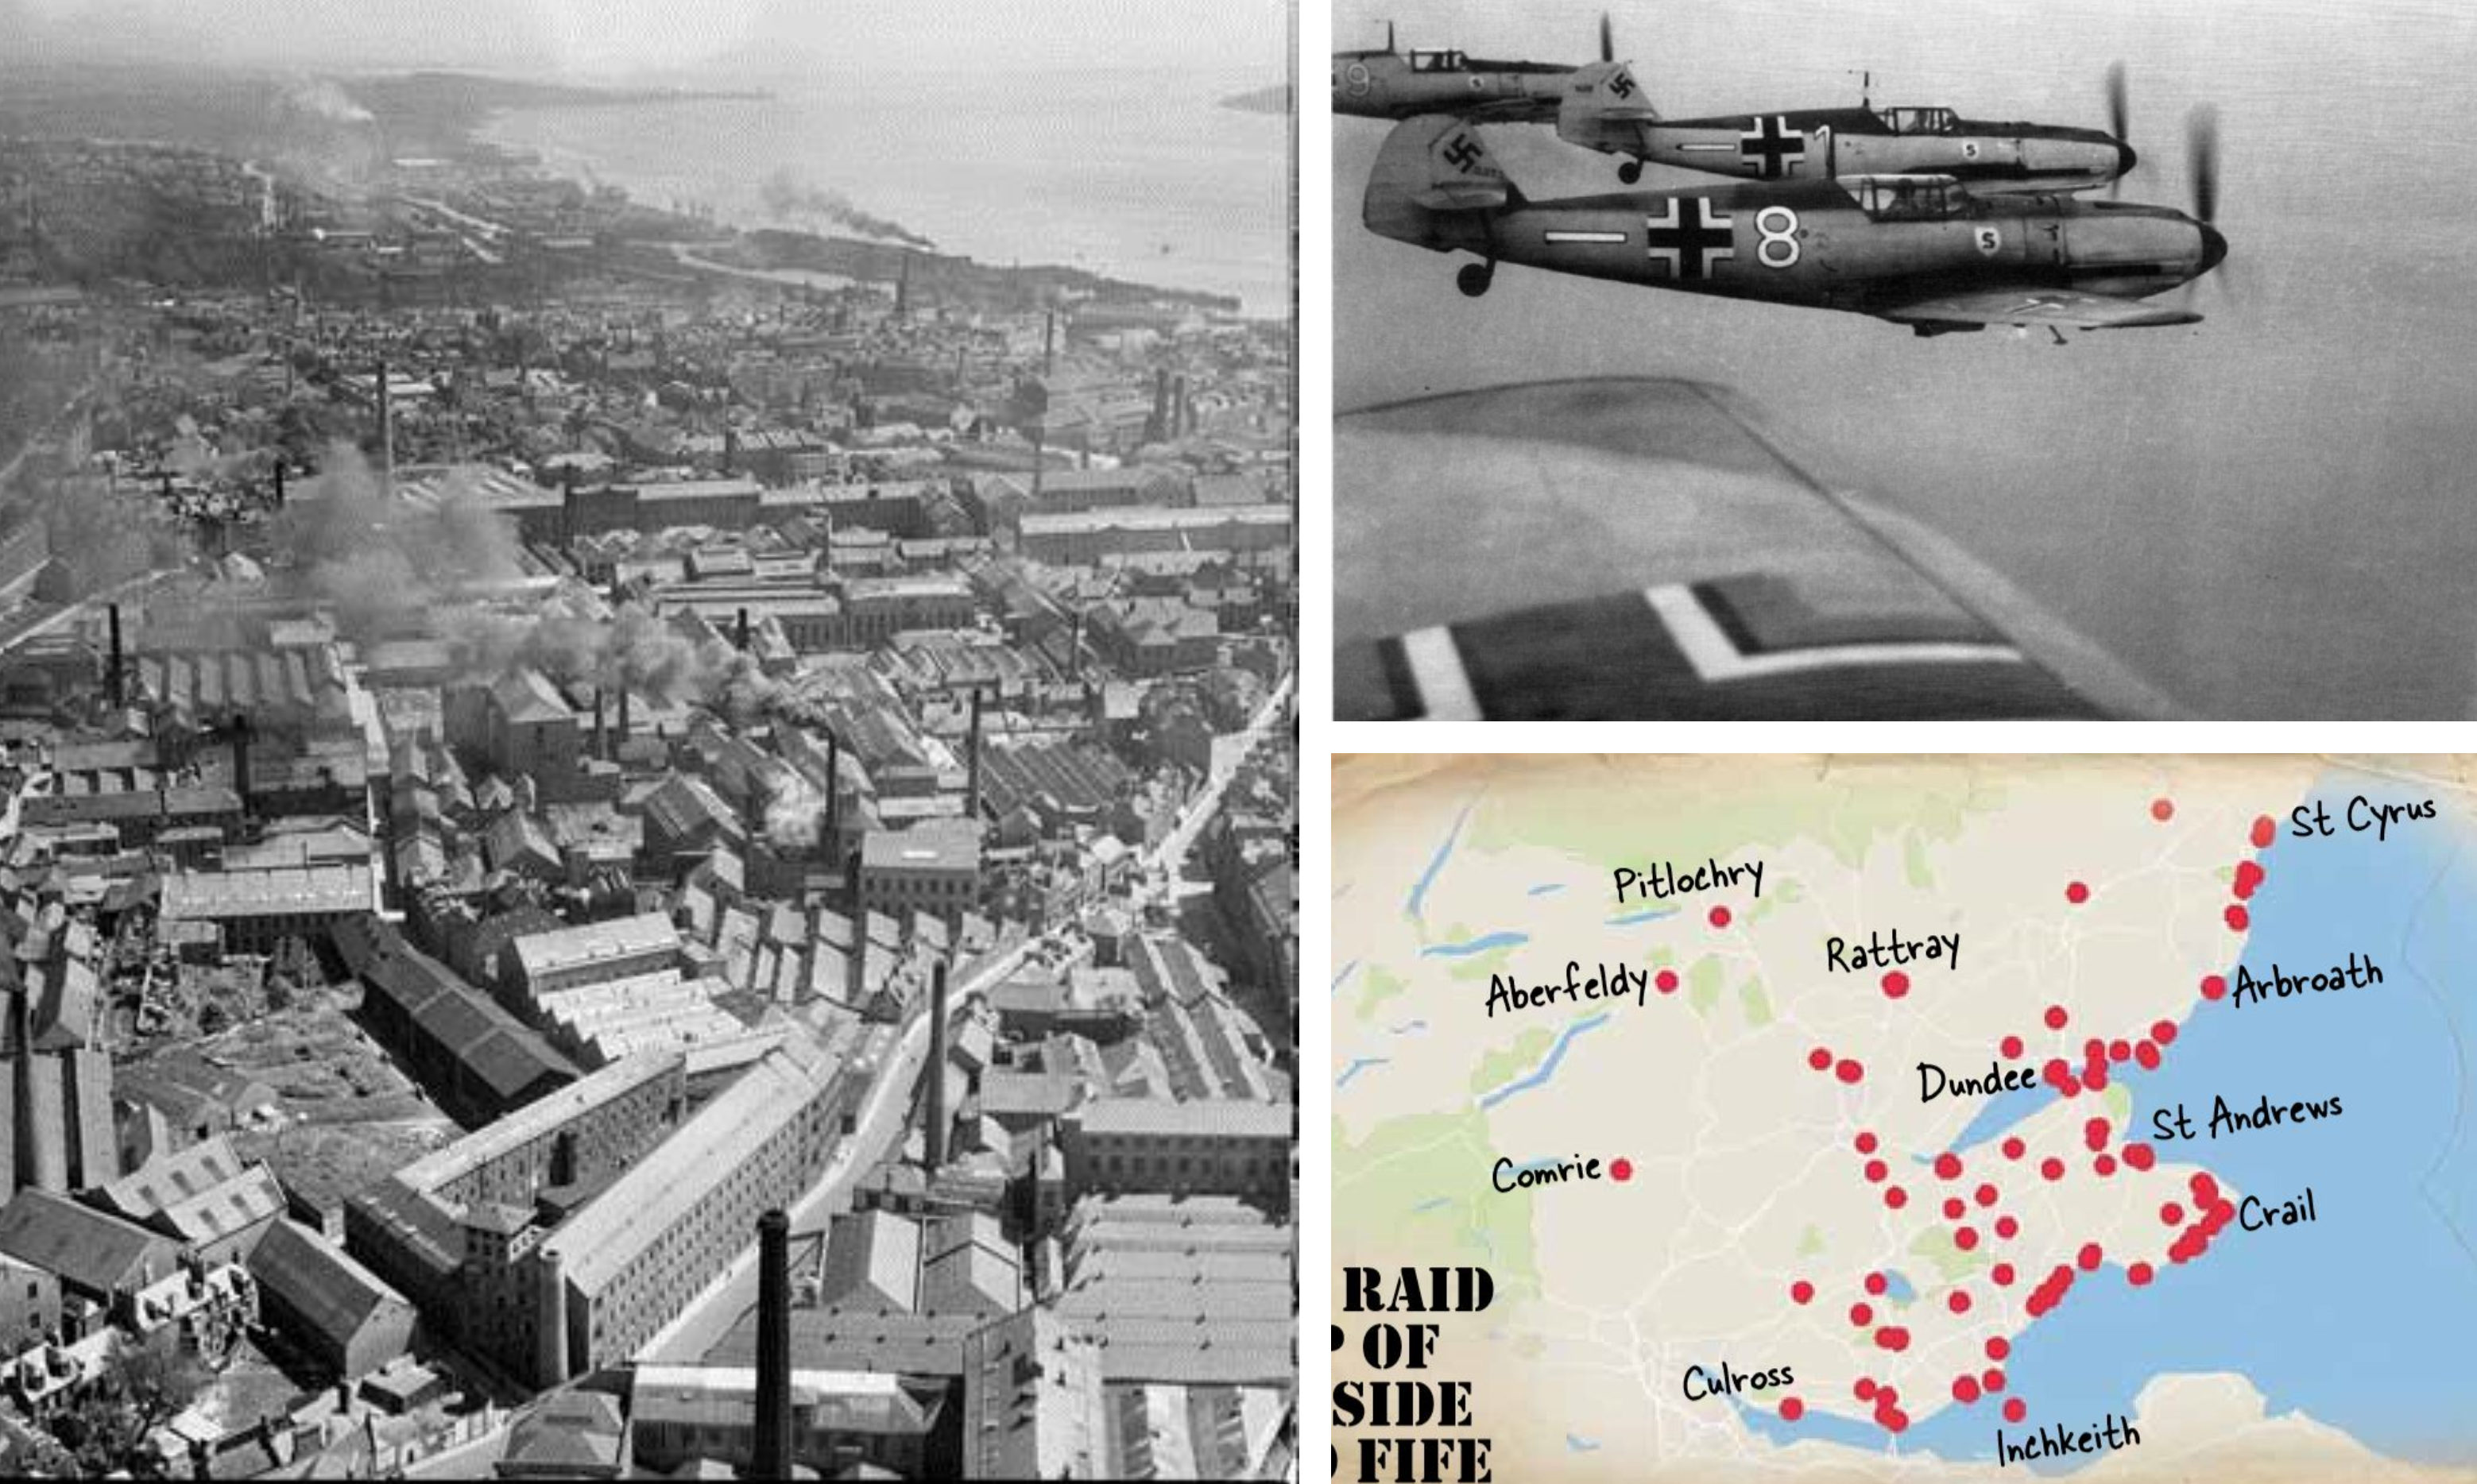 Courier country was hit by a series of deadly air attacks carried out by the Luftwaffe.